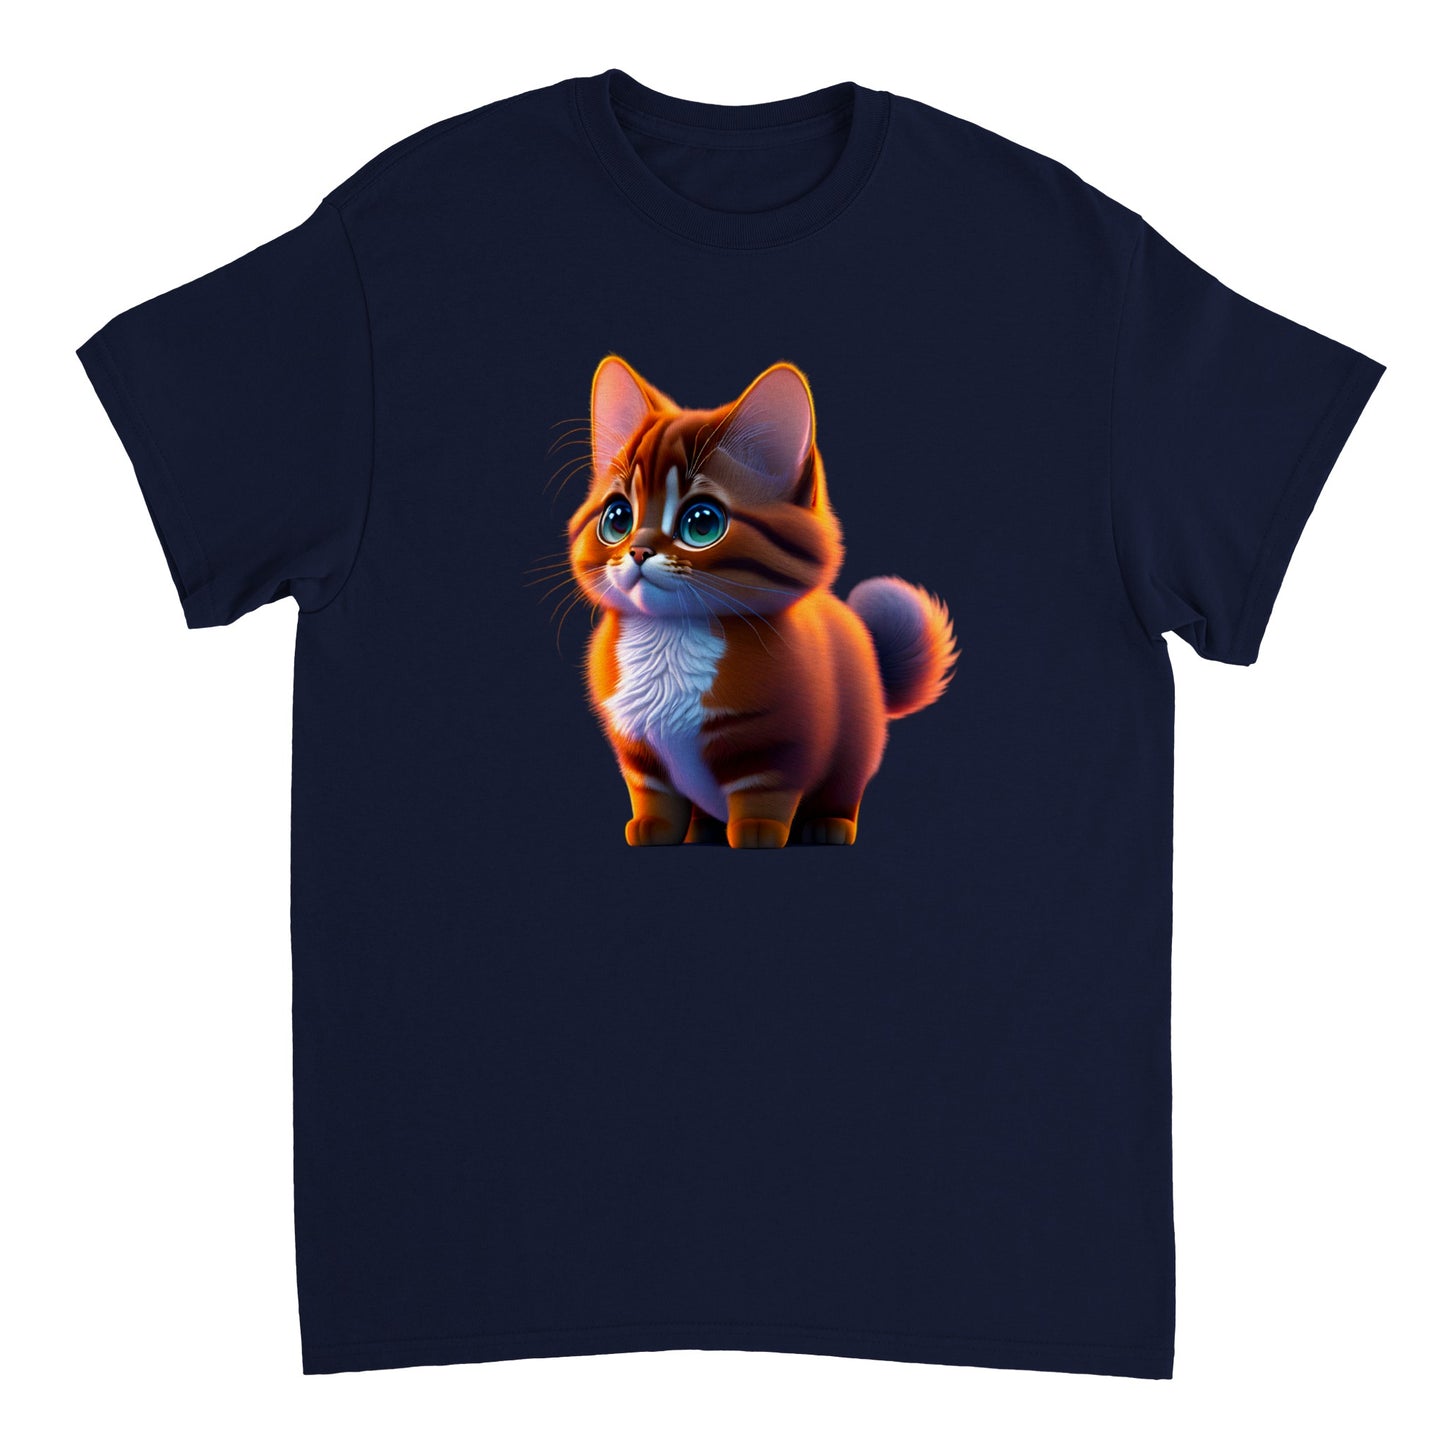 Adorable, Cool, Cute Cats and Kittens Toy - Heavyweight Unisex Crewneck T-shirt 12